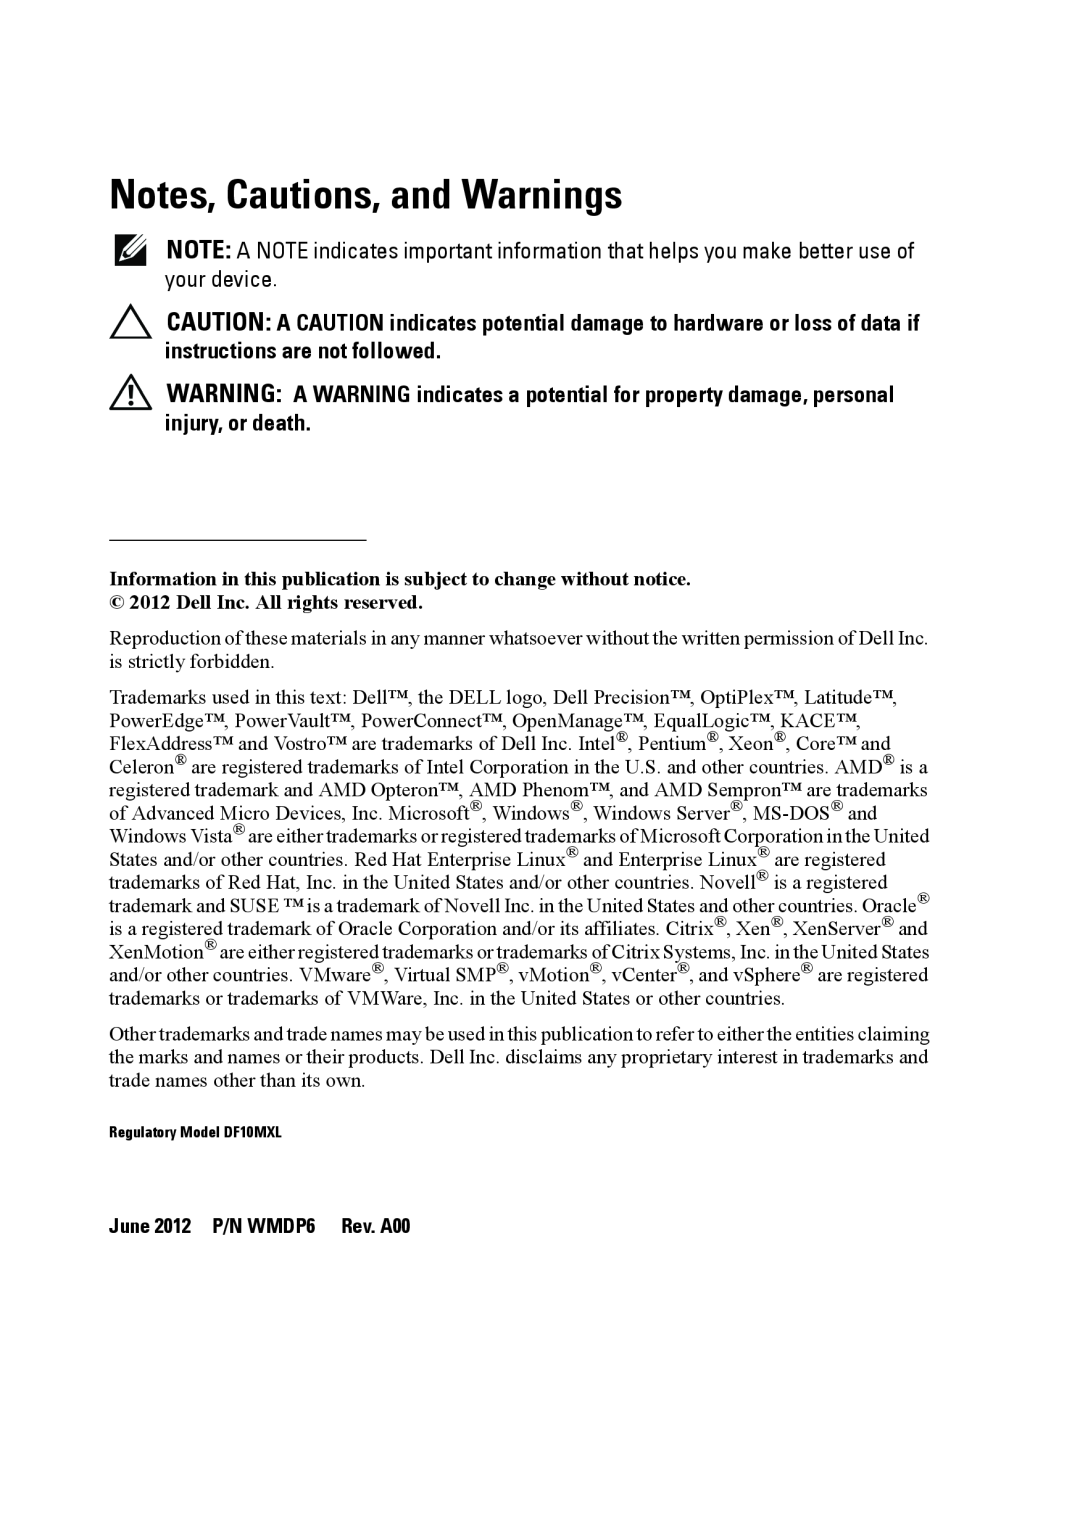 Force10 Networks CC-C-BLNK-LC manual Notes, Cautions, and Warnings, June 2012 P/N WMDP6 Rev. A00 